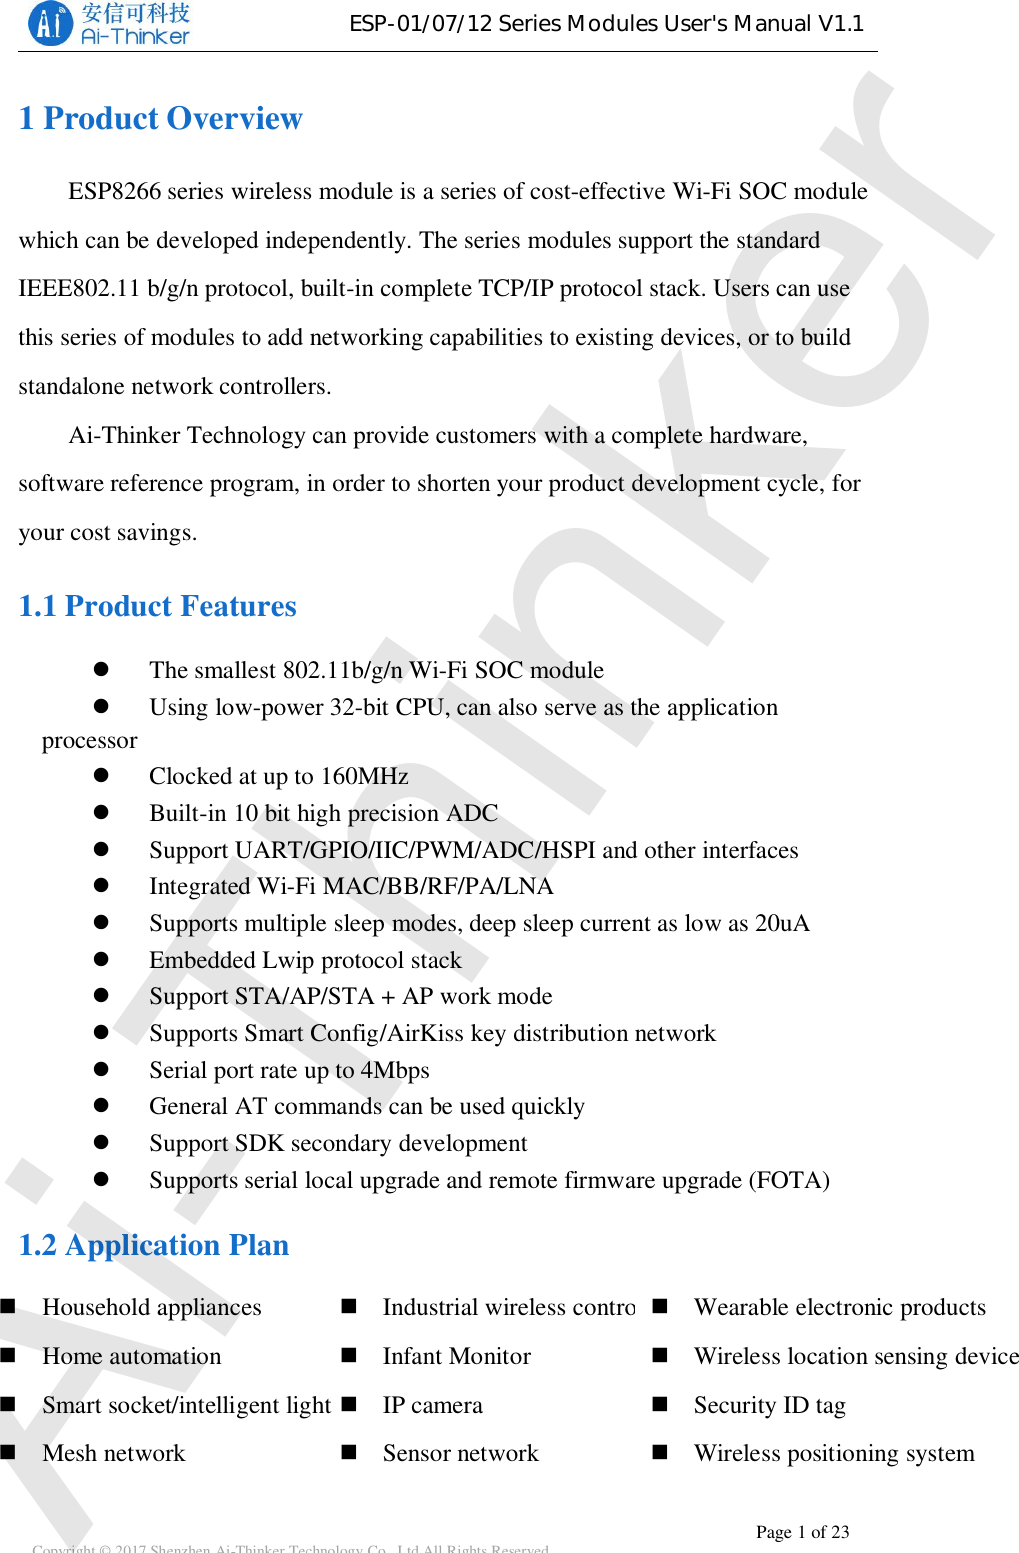 ESP-01/07/12SeriesModulesUser&apos;sManualV1.1Copyright © 2017 Shenzhen Ai-Thinker Technology Co., Ltd All Rights Reserved Page 1 of 231 Product OverviewESP8266 series wireless module is a series of cost-effective Wi-Fi SOC modulewhich can be developed independently. The series modules support the standardIEEE802.11 b/g/n protocol, built-in complete TCP/IP protocol stack. Users can usethis series of modules to add networking capabilities to existing devices, or to buildstandalone network controllers.Ai-Thinker Technology can provide customers with a complete hardware,software reference program, in order to shorten your product development cycle, foryour cost savings.1.1 Product FeaturesThe smallest 802.11b/g/n Wi-Fi SOC moduleUsing low-power 32-bit CPU, can also serve as the applicationprocessorClocked at up to 160MHzBuilt-in10bithighprecisionADCSupport UART/GPIO/IIC/PWM/ADC/HSPI and other interfacesIntegrated Wi-Fi MAC/BB/RF/PA/LNASupports multiple sleep modes, deep sleep current as low as 20uAEmbedded Lwip protocol stackSupport STA/AP/STA + AP work modeSupports Smart Config/AirKiss key distribution networkSerial port rate up to 4MbpsGeneral AT commands can be used quicklySupport SDK secondary developmentSupports serial local upgrade and remote firmware upgrade (FOTA)1.2 Application PlanIndustrial wireless controlInfant MonitorIP cameraSensor networkHousehold appliancesHome automationSmart socket/intelligent lightMesh networkWearable electronic productsWireless location sensing deviceSecurity ID tagWireless positioning systemAi-Thinker